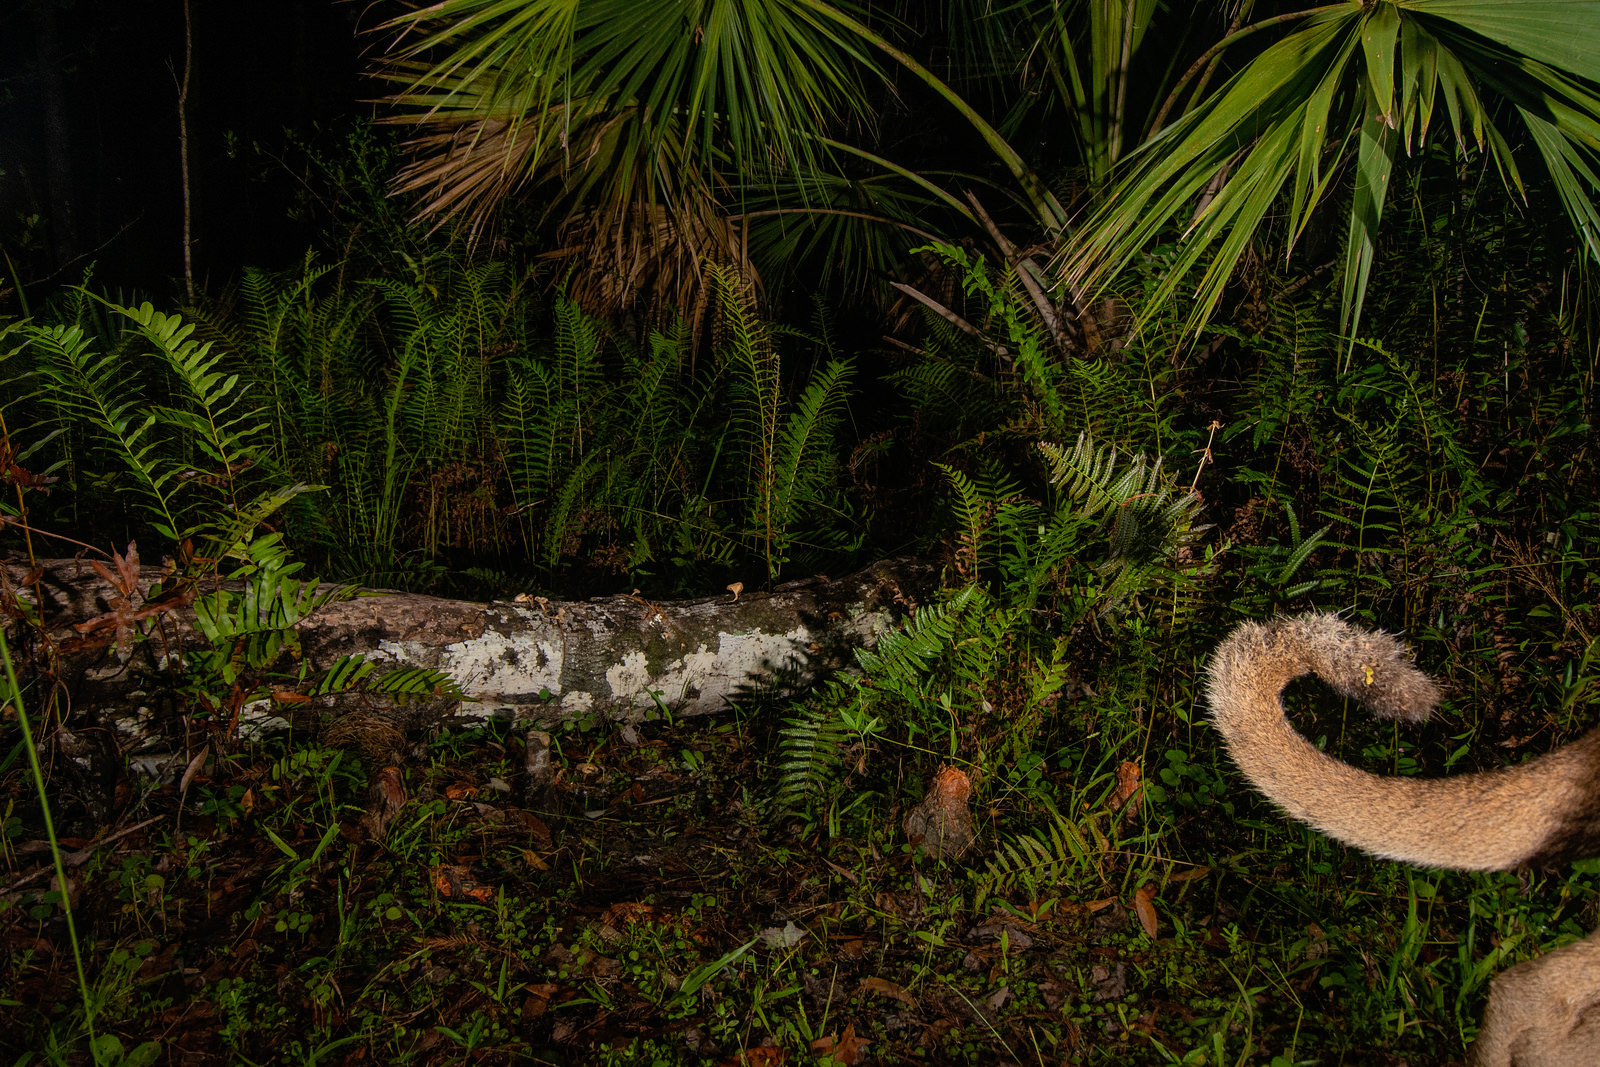 A Florida panther's tail flicks by at night in the florida wild with ferns